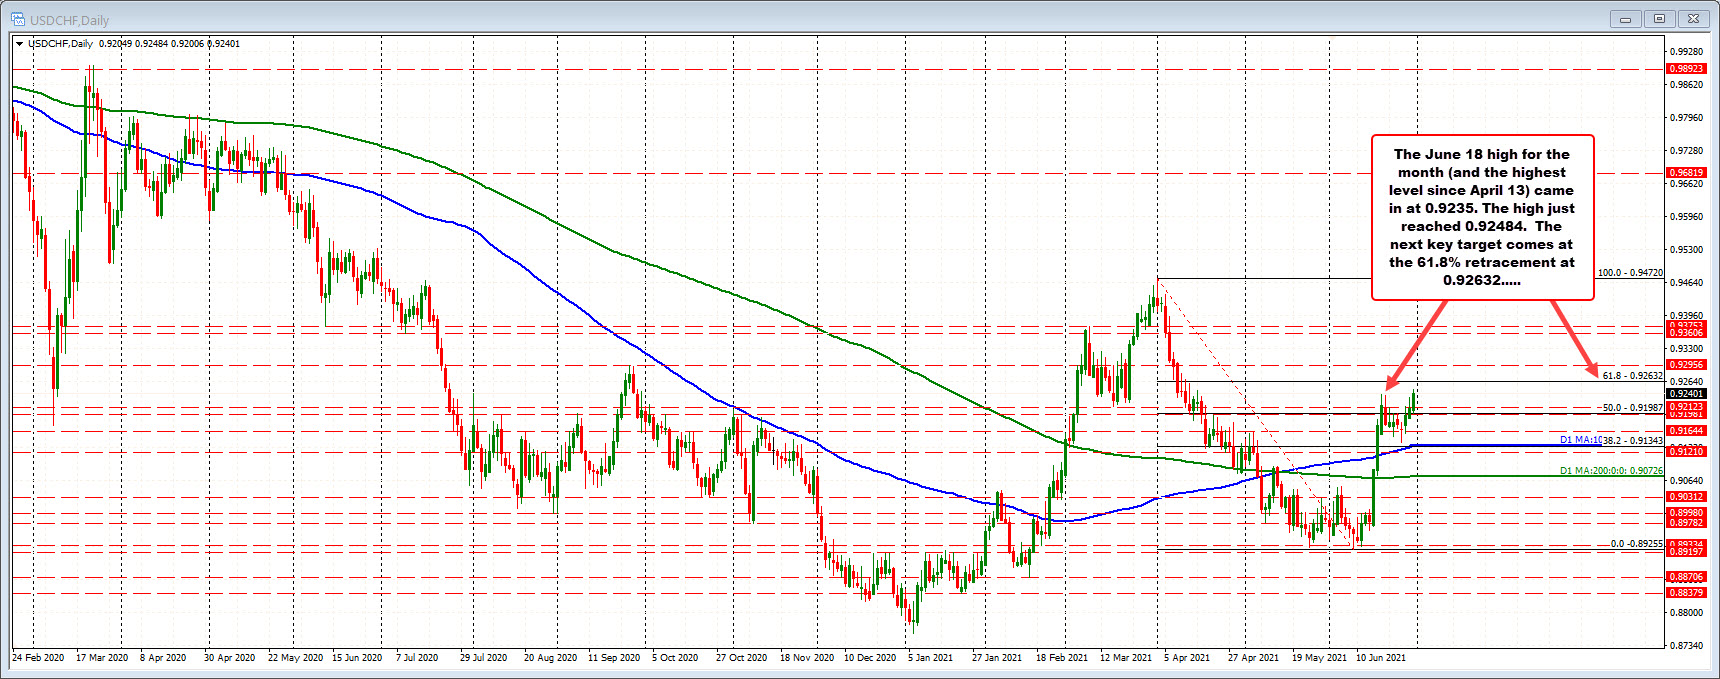 USDCHF trades to the highest level since April 13